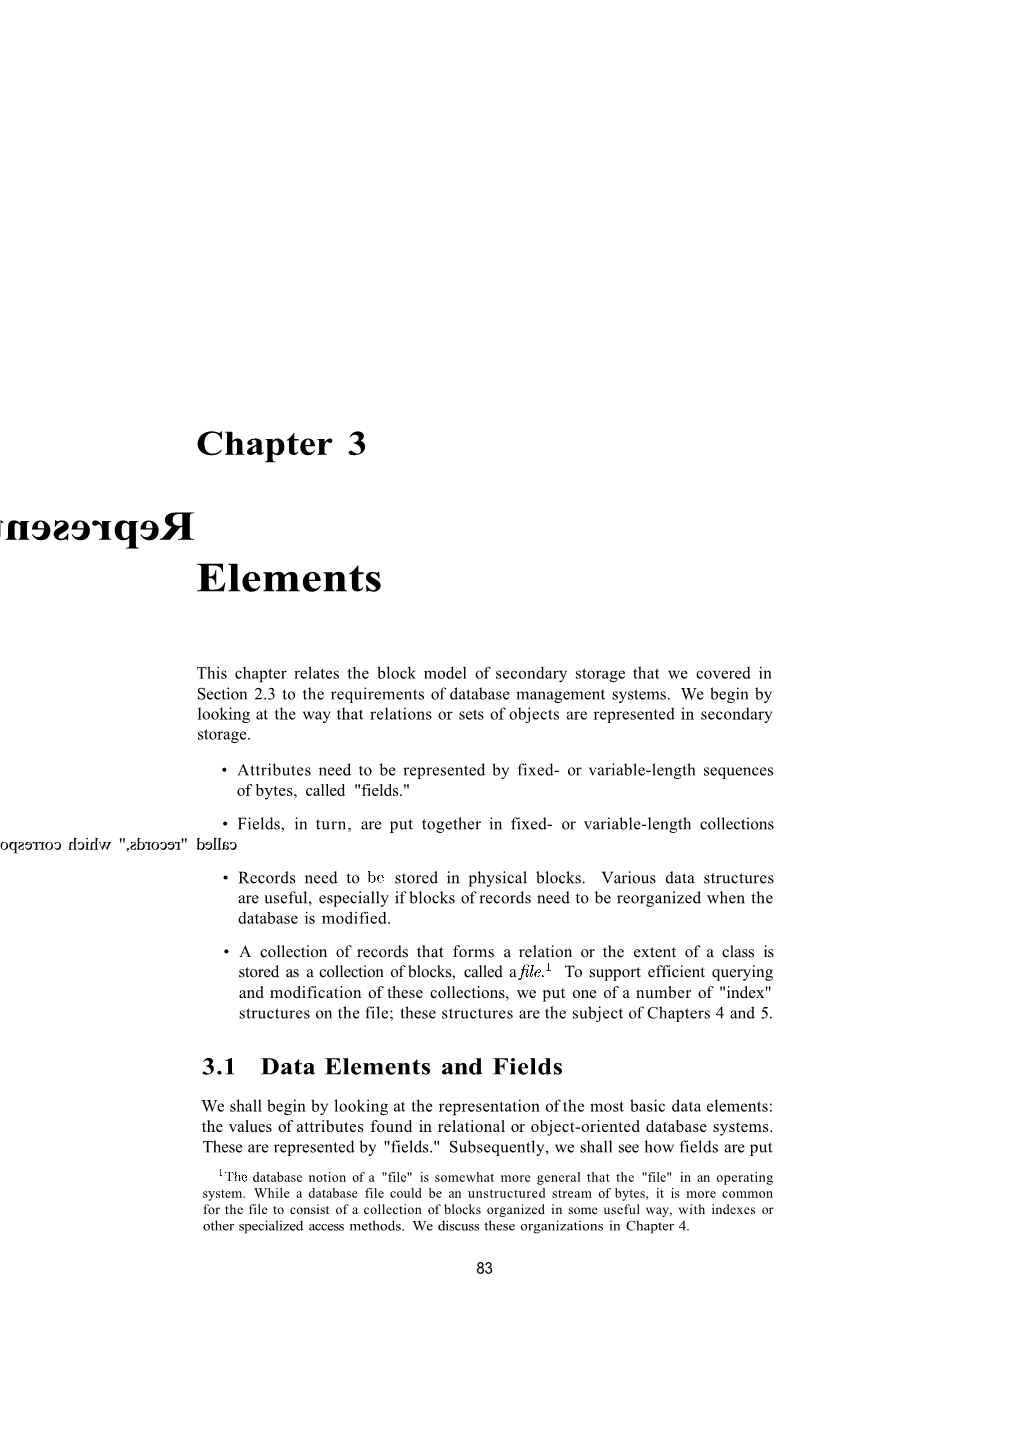 Chapter 3 Representing Data Elements